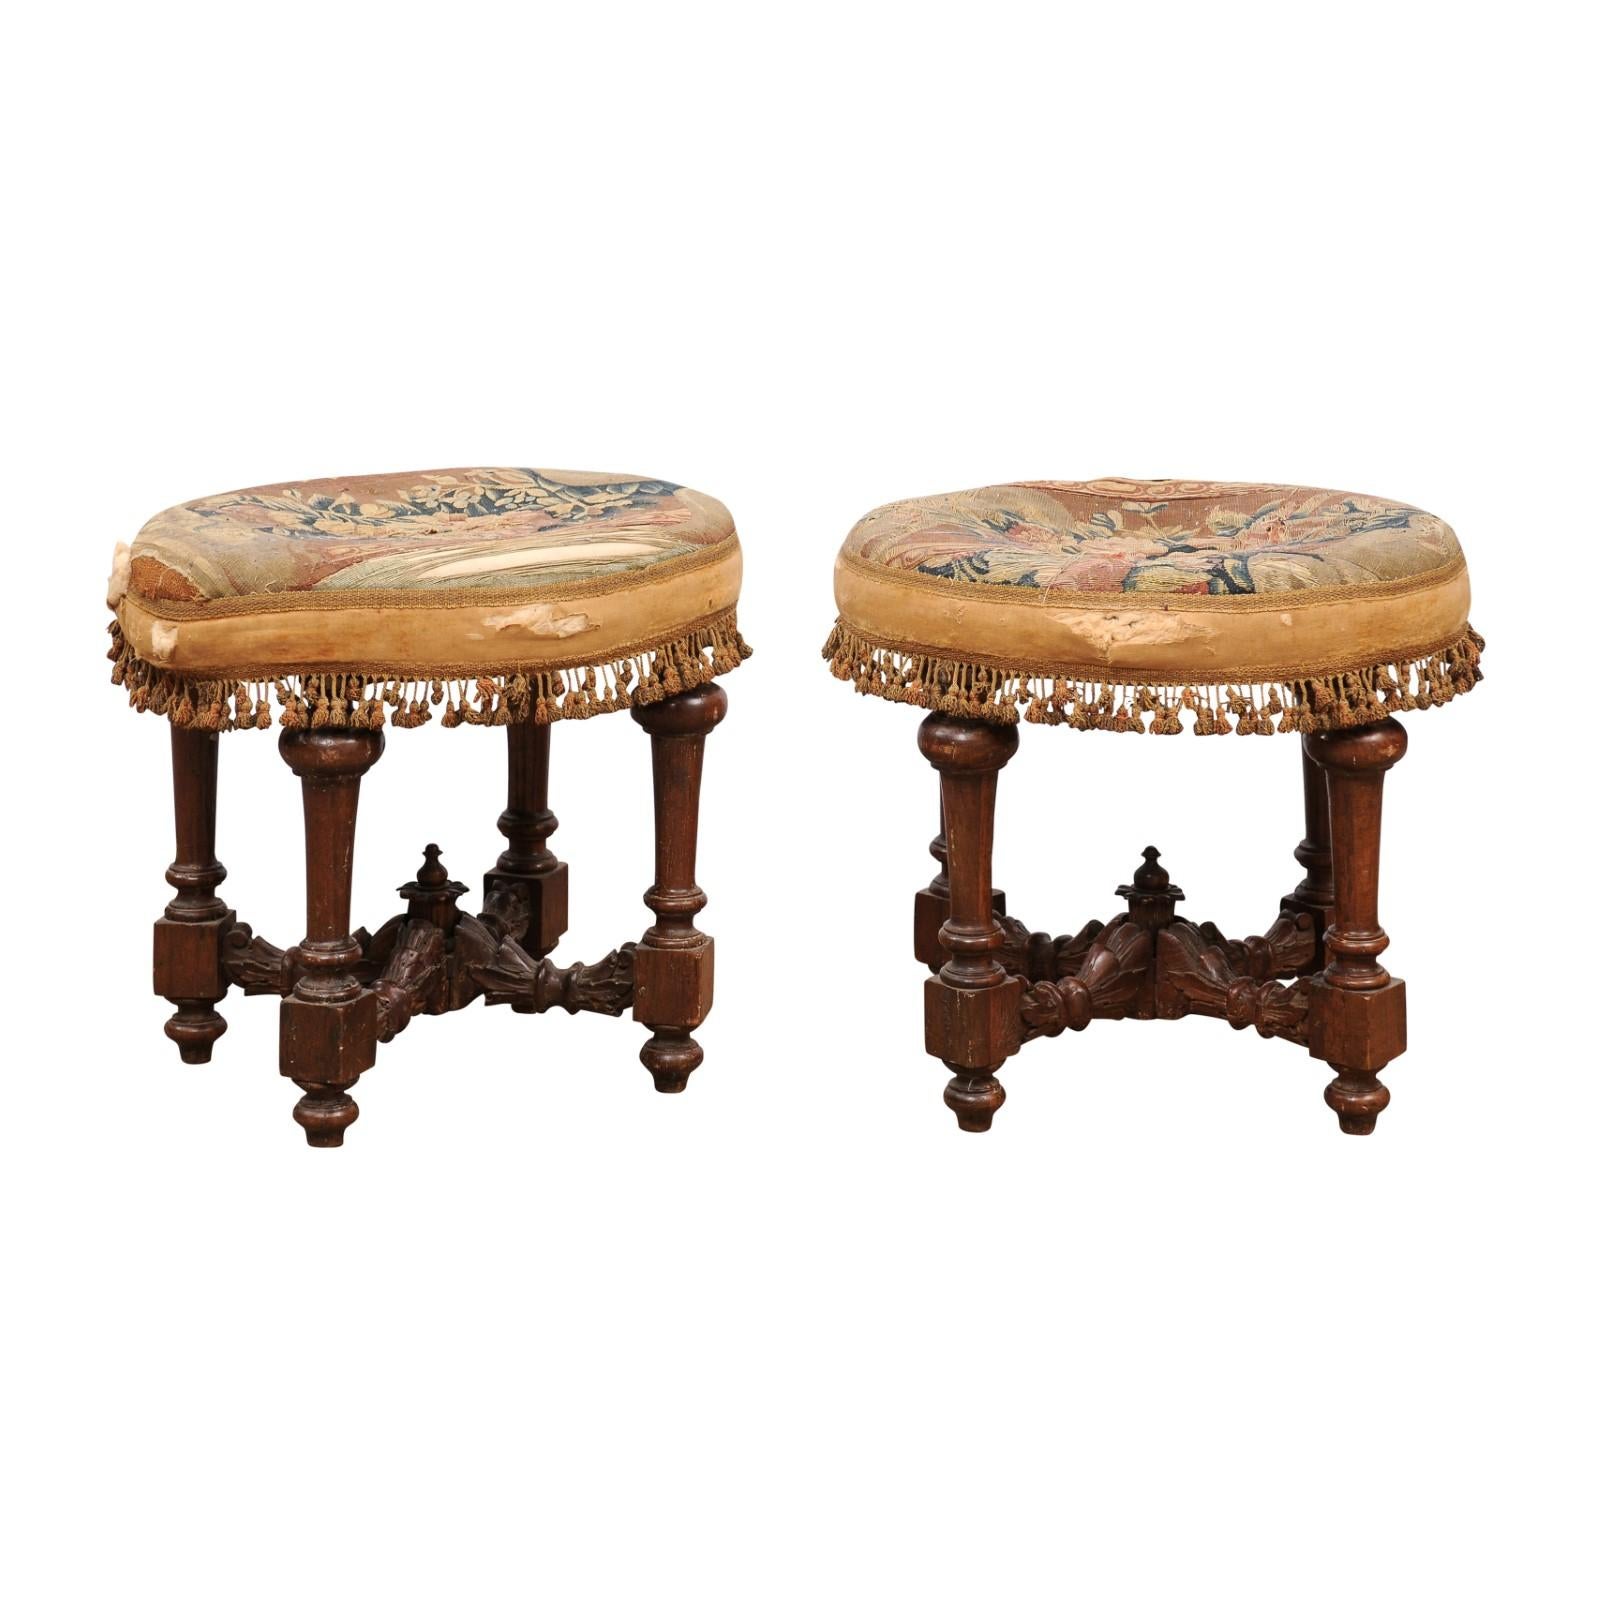 Pair of Oval 18th Century Italian Walnut Benches with Turned Legs and Tapestry Tops